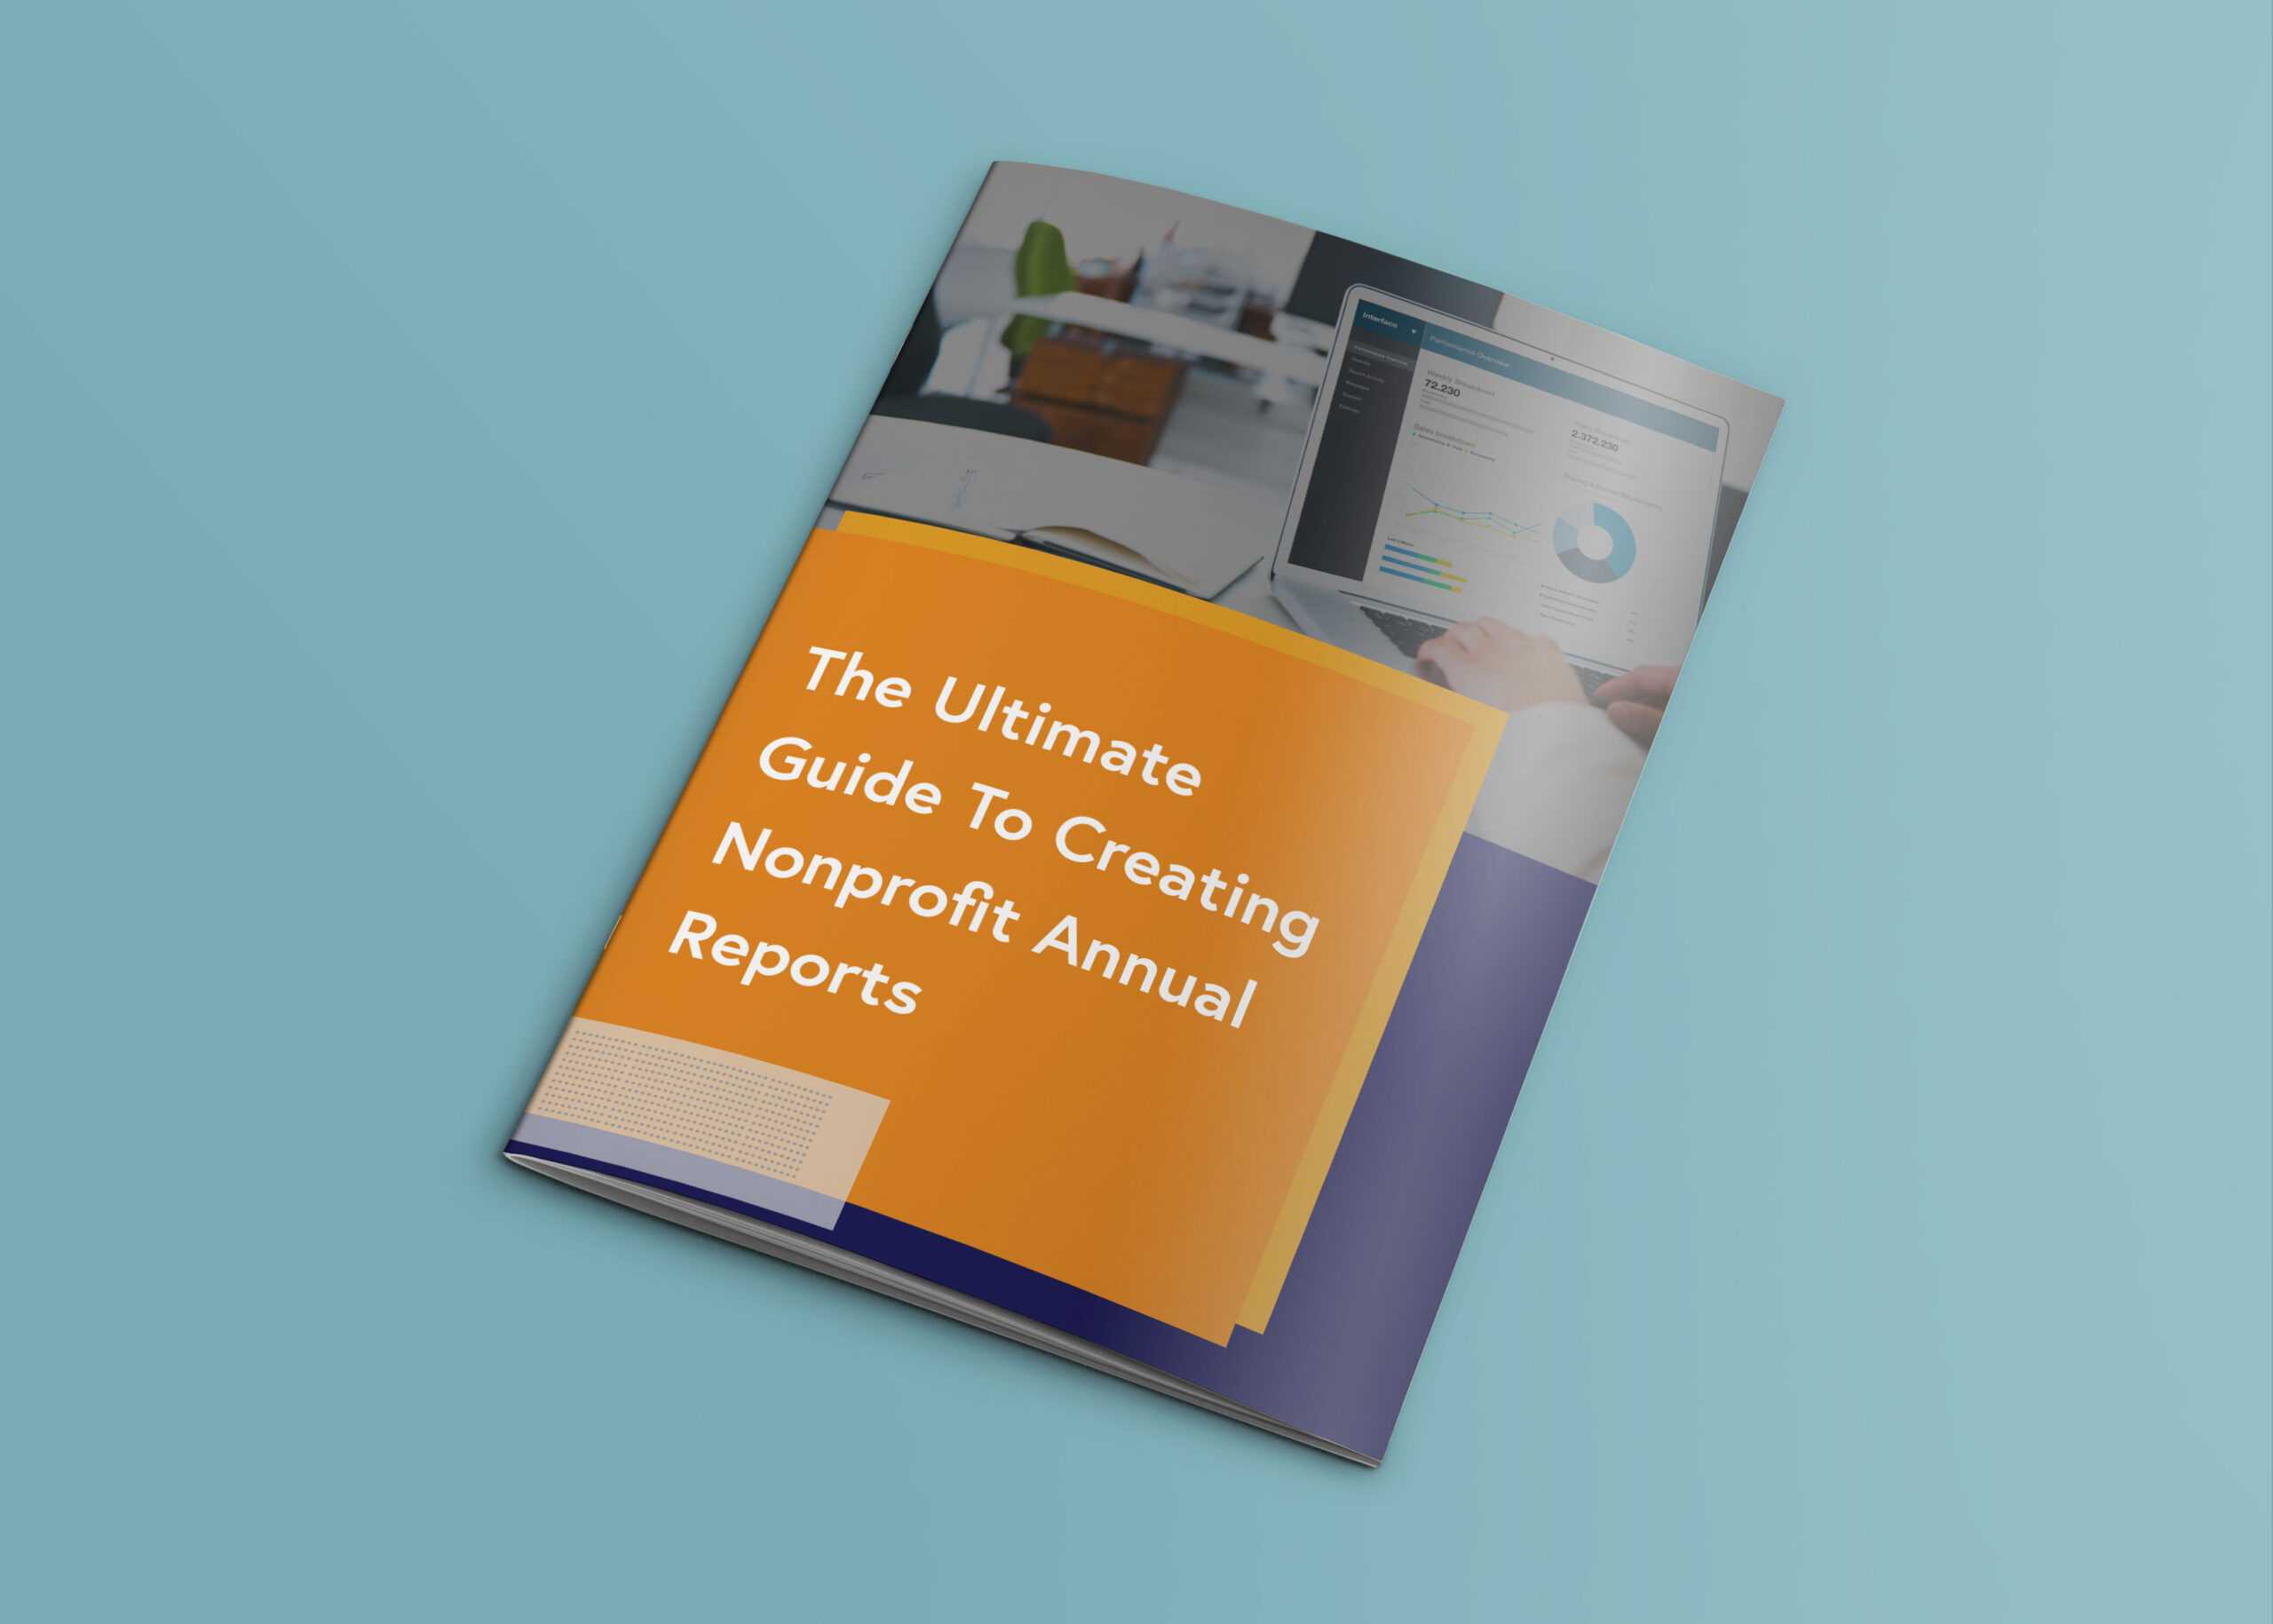 The Ultimate Guide To Creating Nonprofit Annual Reports With Regard To Chairman's Annual Report Template